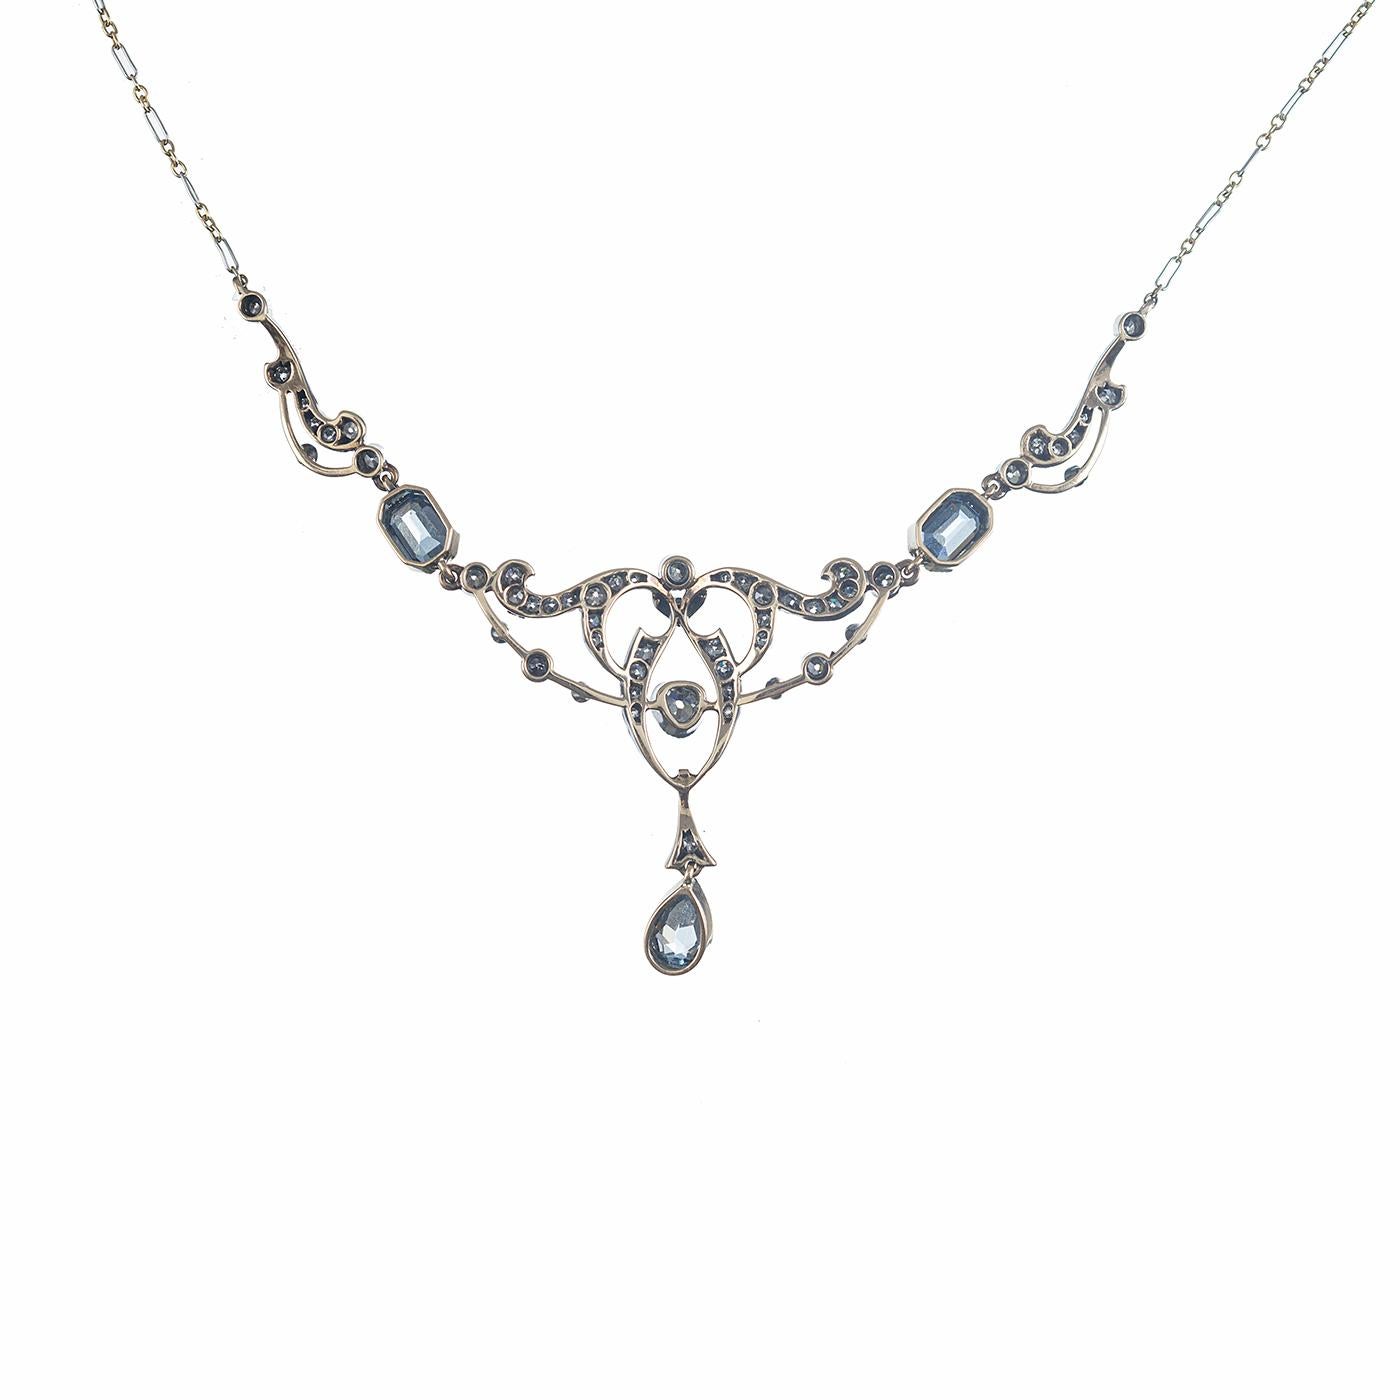 A classic festoon style necklace, oozing Victorian charm with its lacy design centered upon a display of aquamarine and diamonds. Set in silver over gold, the aquamarines weigh approximately 3.00 carats and the diamonds weigh approximately 1.50